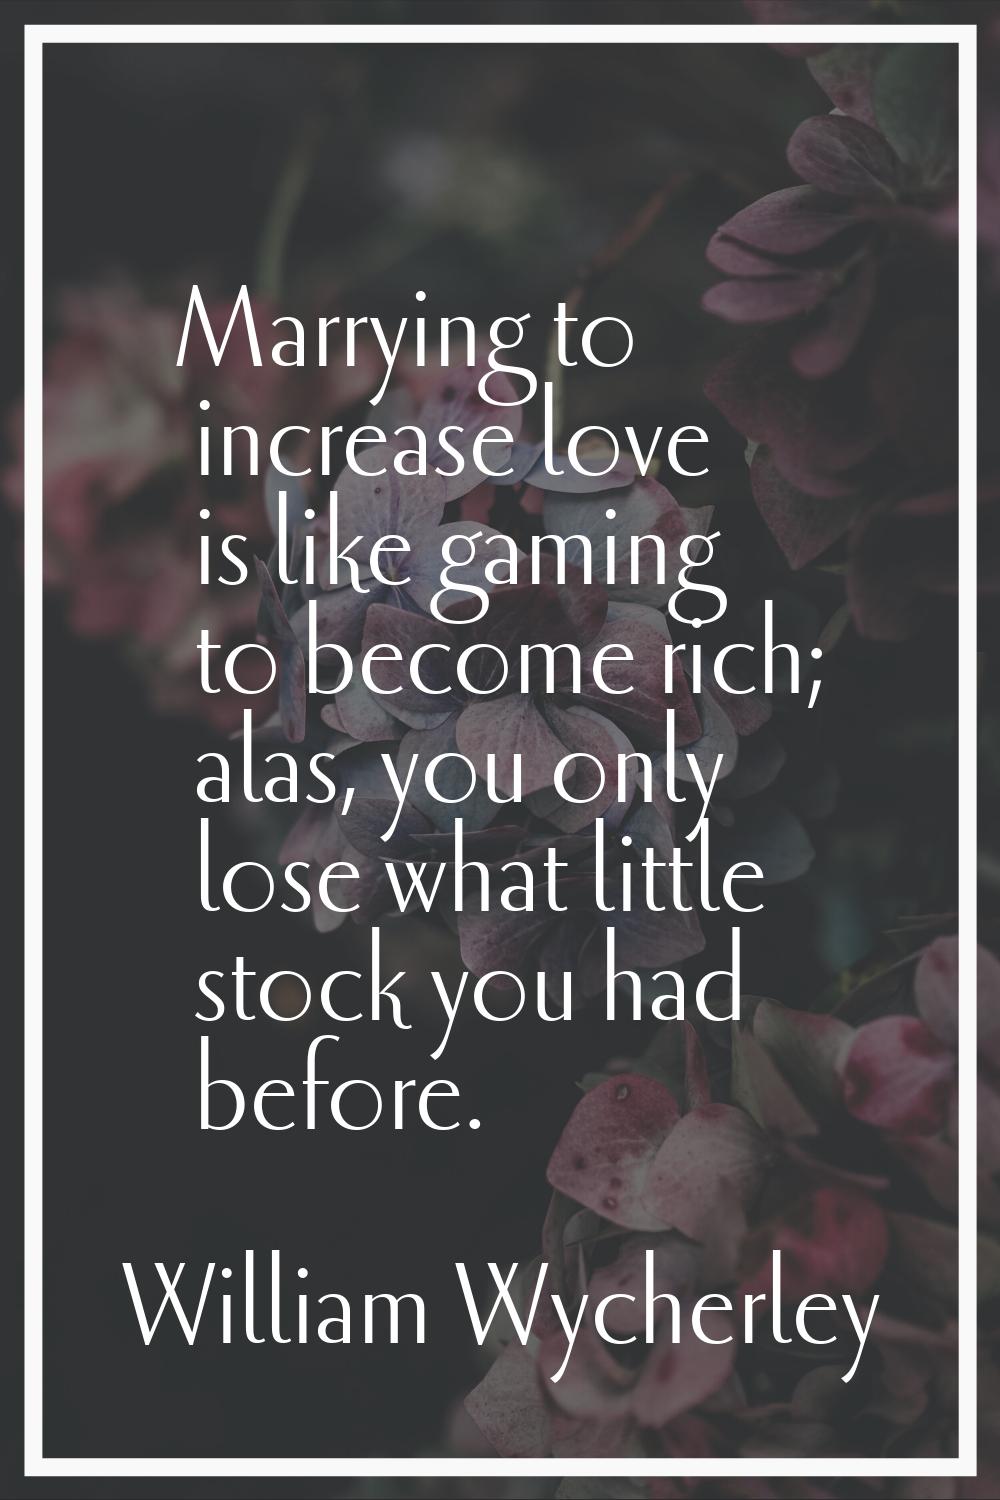 Marrying to increase love is like gaming to become rich; alas, you only lose what little stock you 